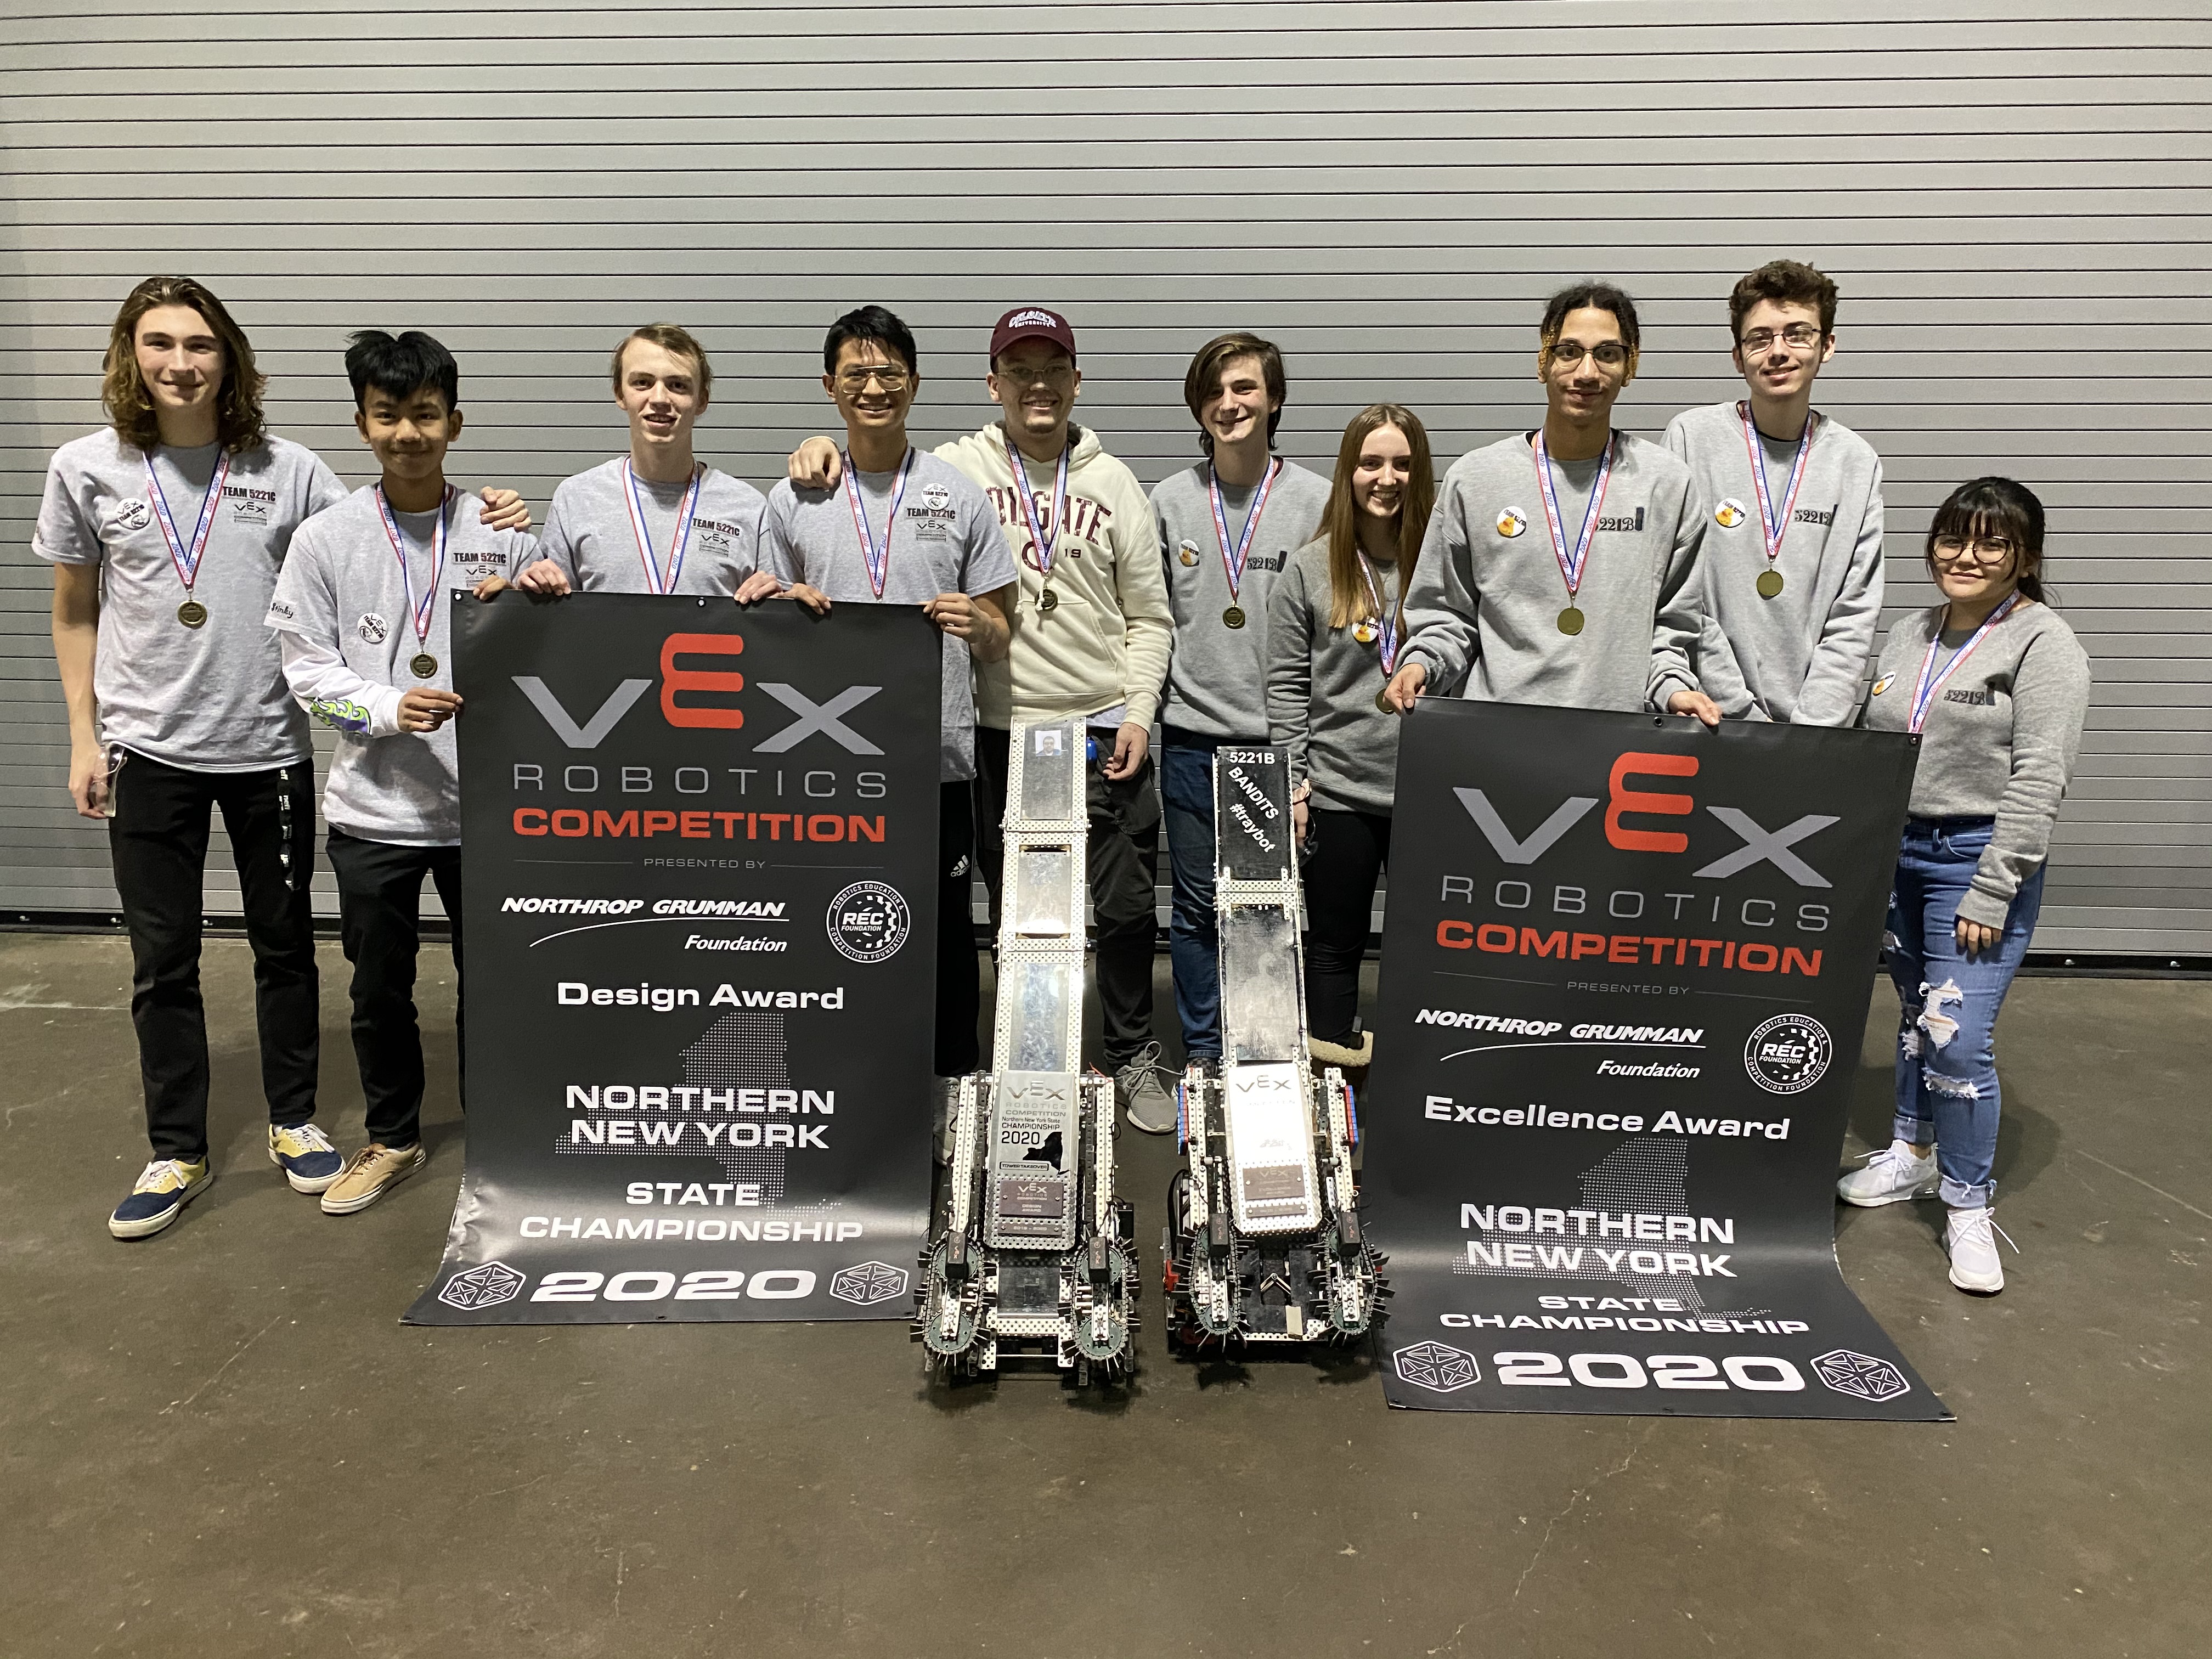 This is a photo of a group of Corcoran VEX students standing in a line, smiling as they hold VEX Championship signs.